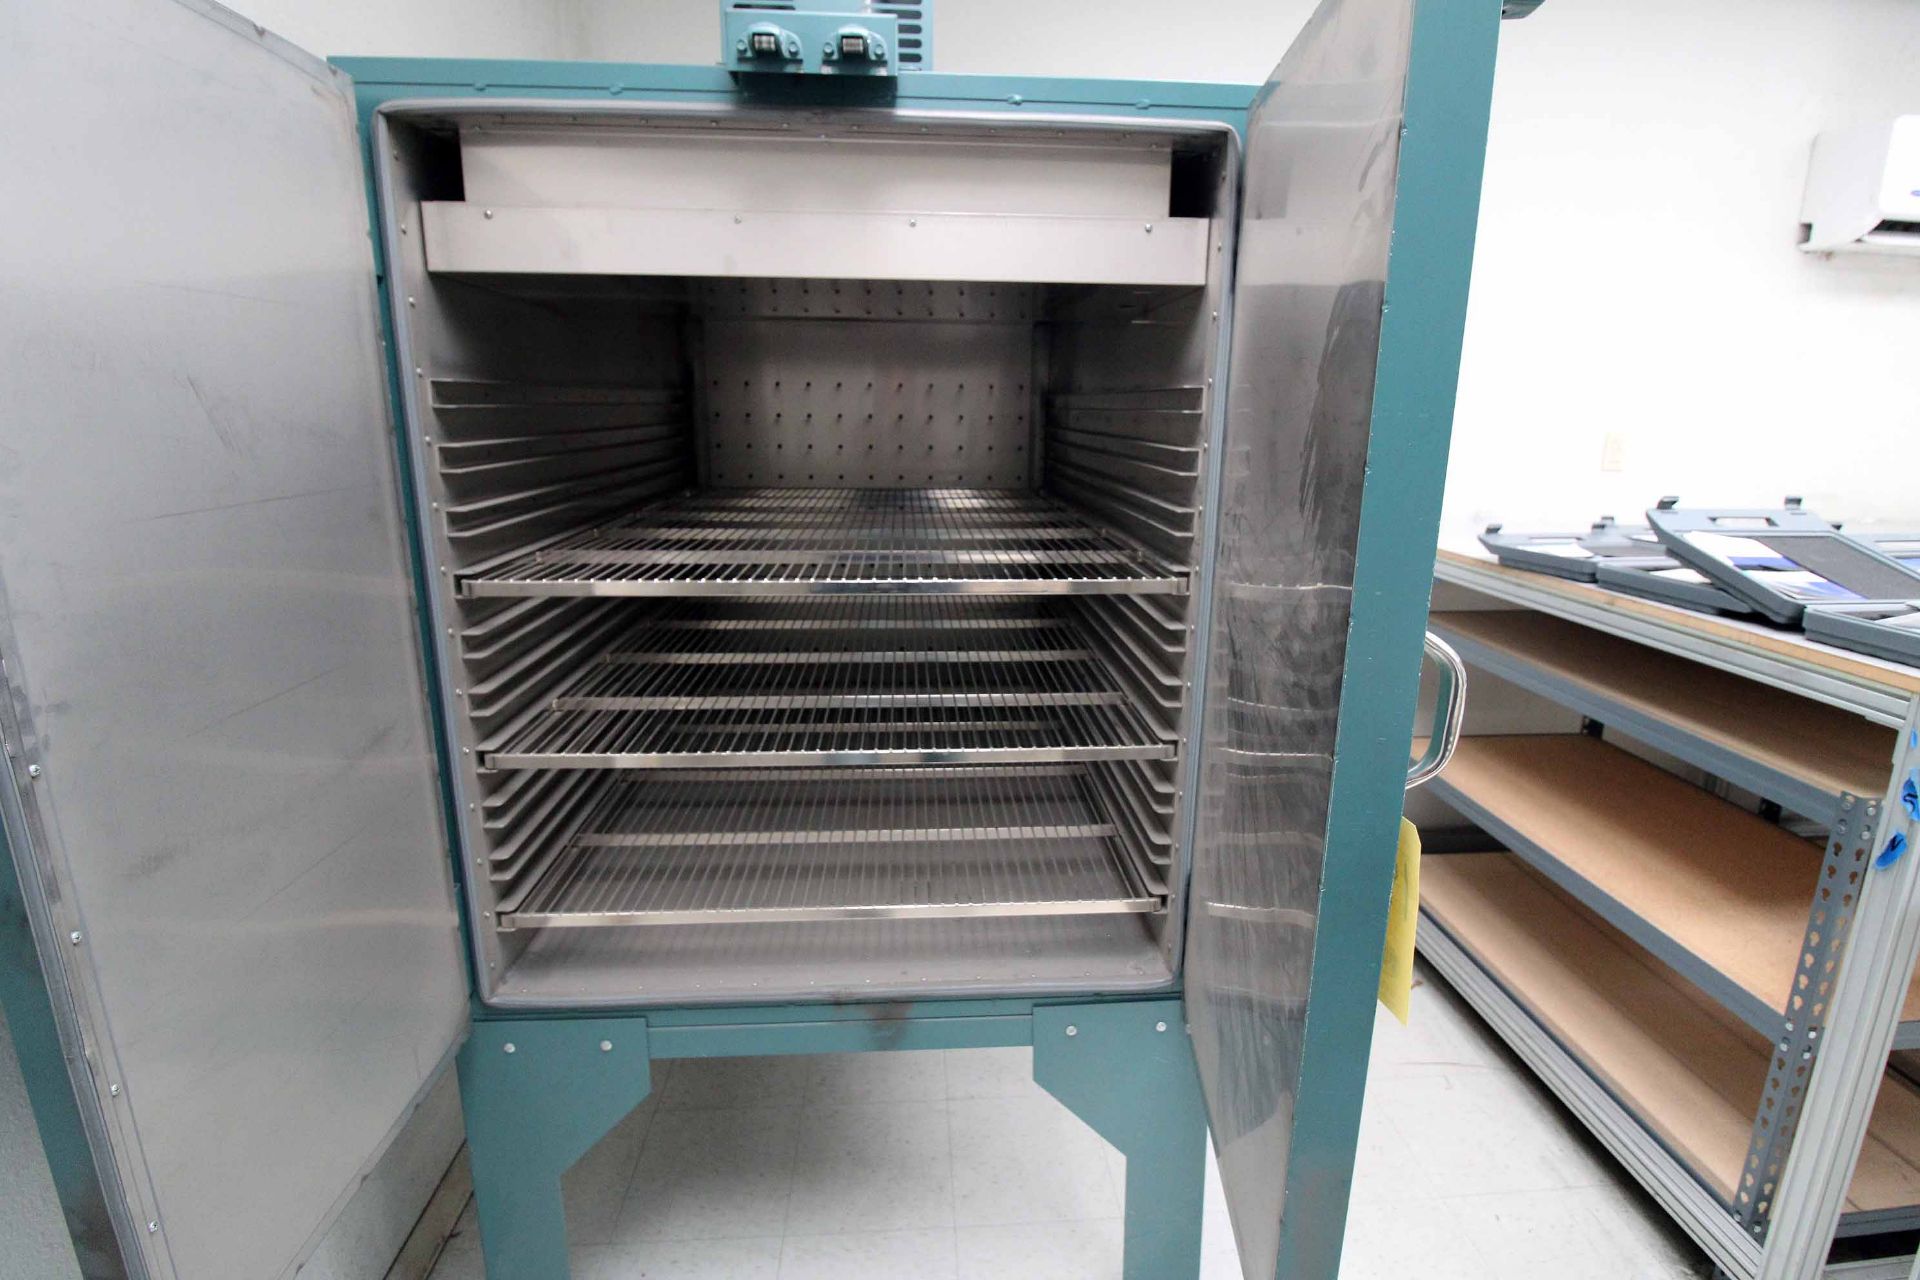 CABINET OVEN, GRIEVE MDL. 343, 6.6 KW, 400 deg. max. temp., stainless steel lined, interior - Image 4 of 5